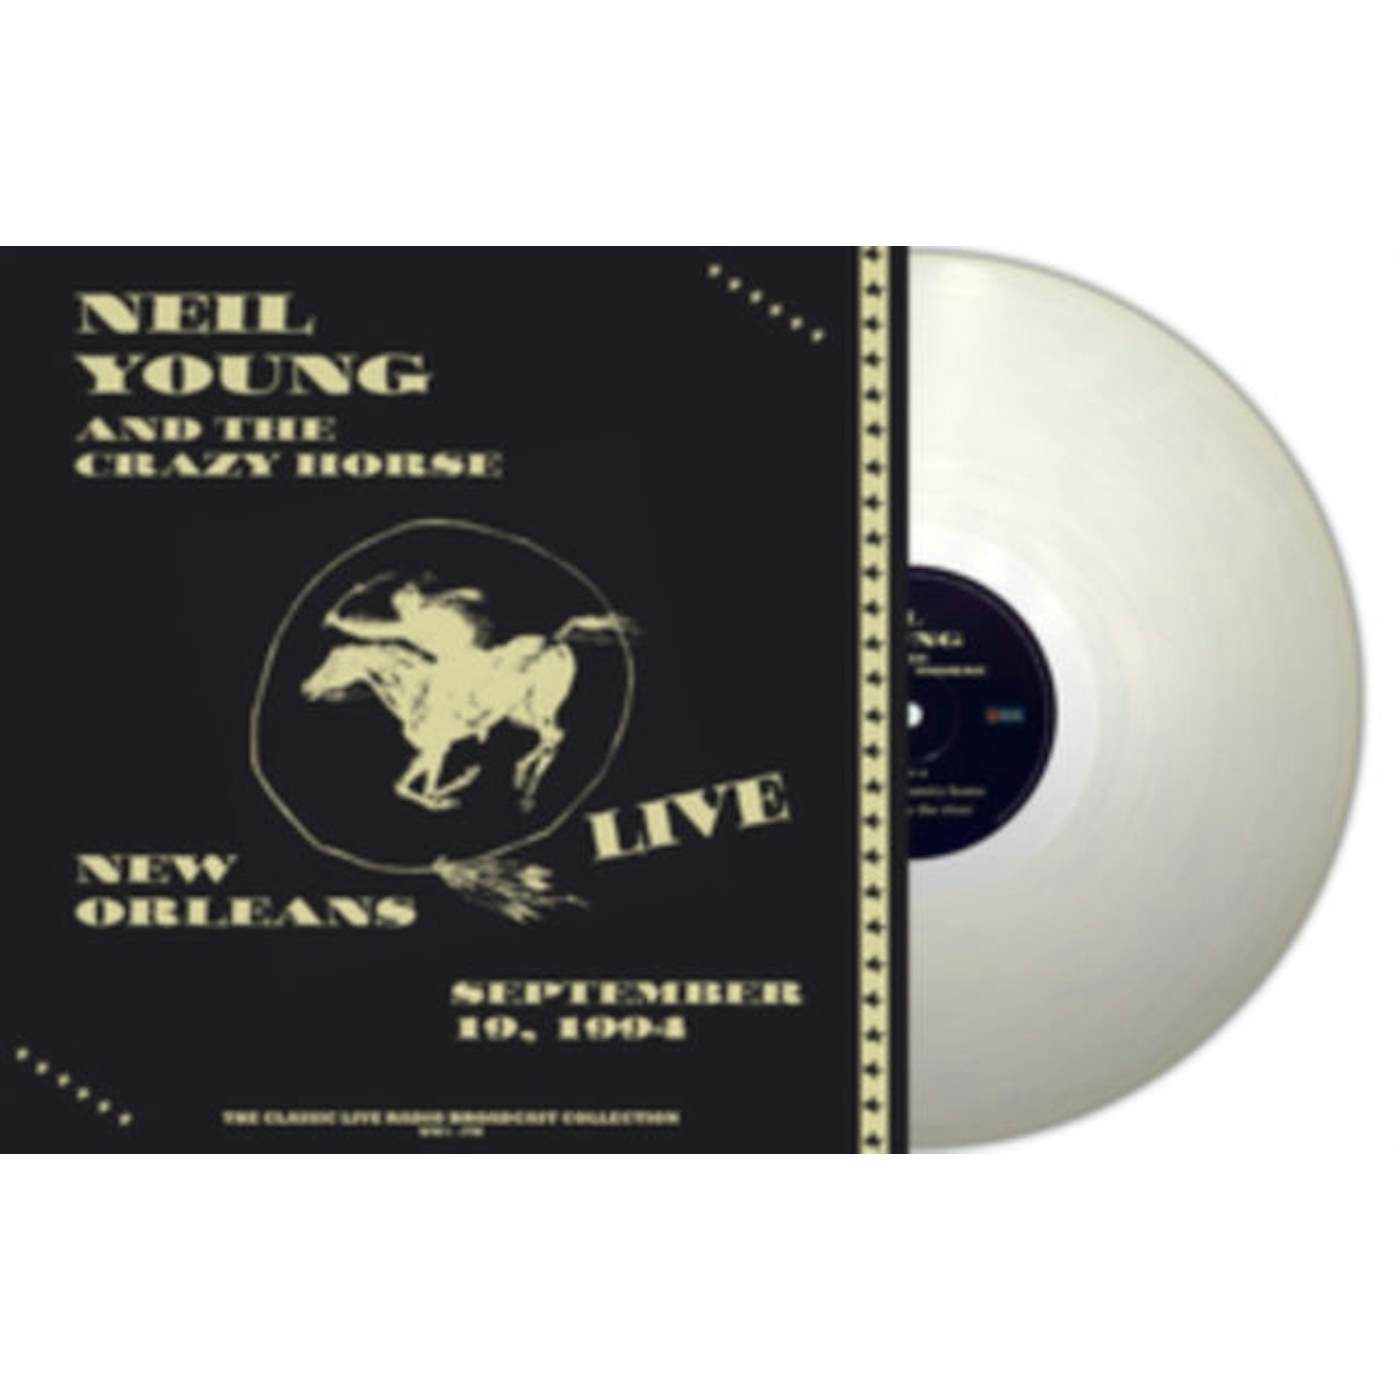 Neil Young & Crazy Horse LP - Live In New Orleans 1994 (Natural Clear Vinyl)